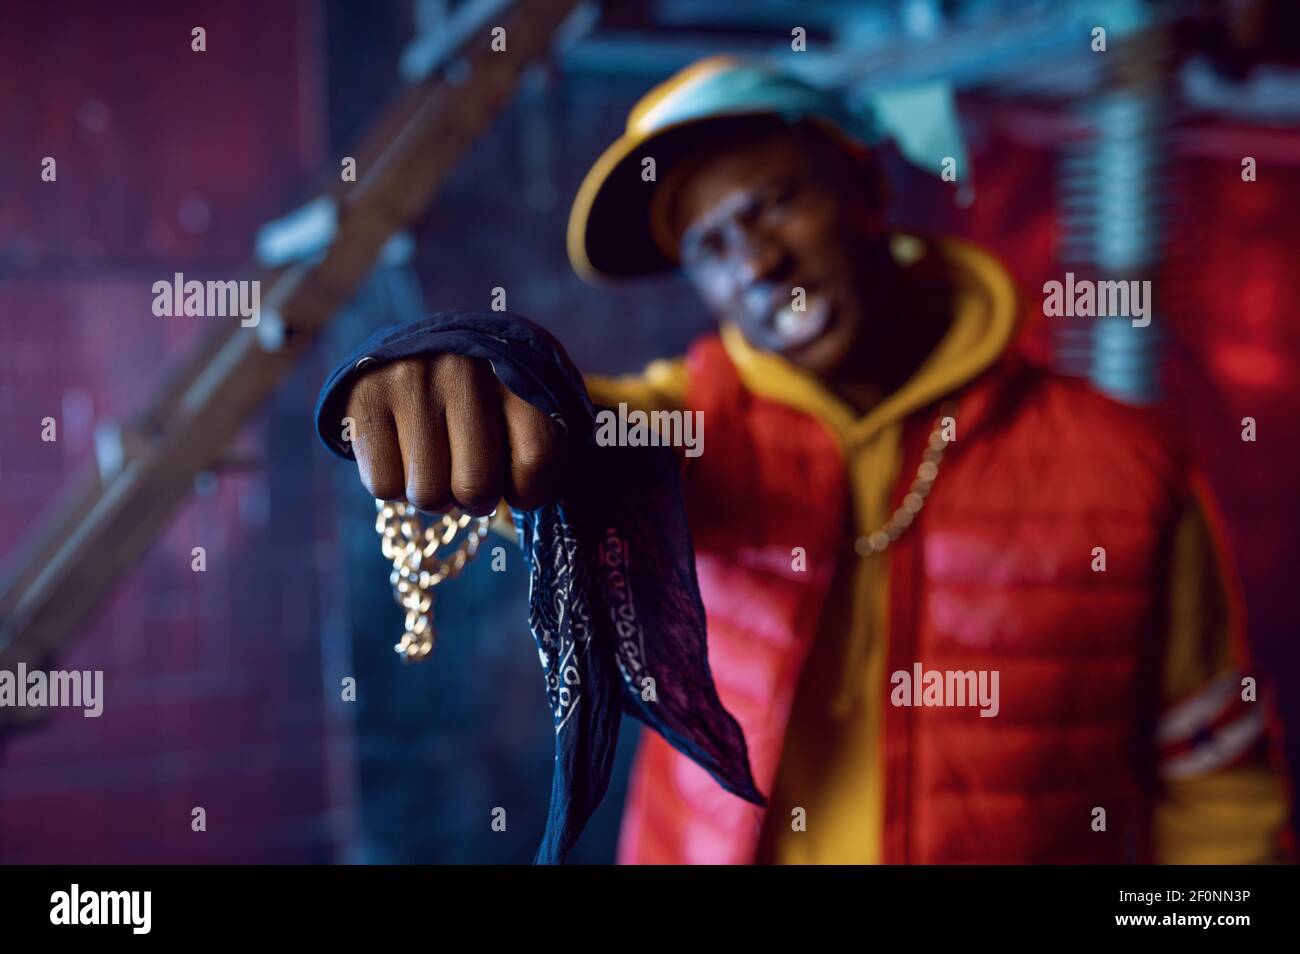 Rapper with gold chain posing in grunge studio Stock Photo - Alamy